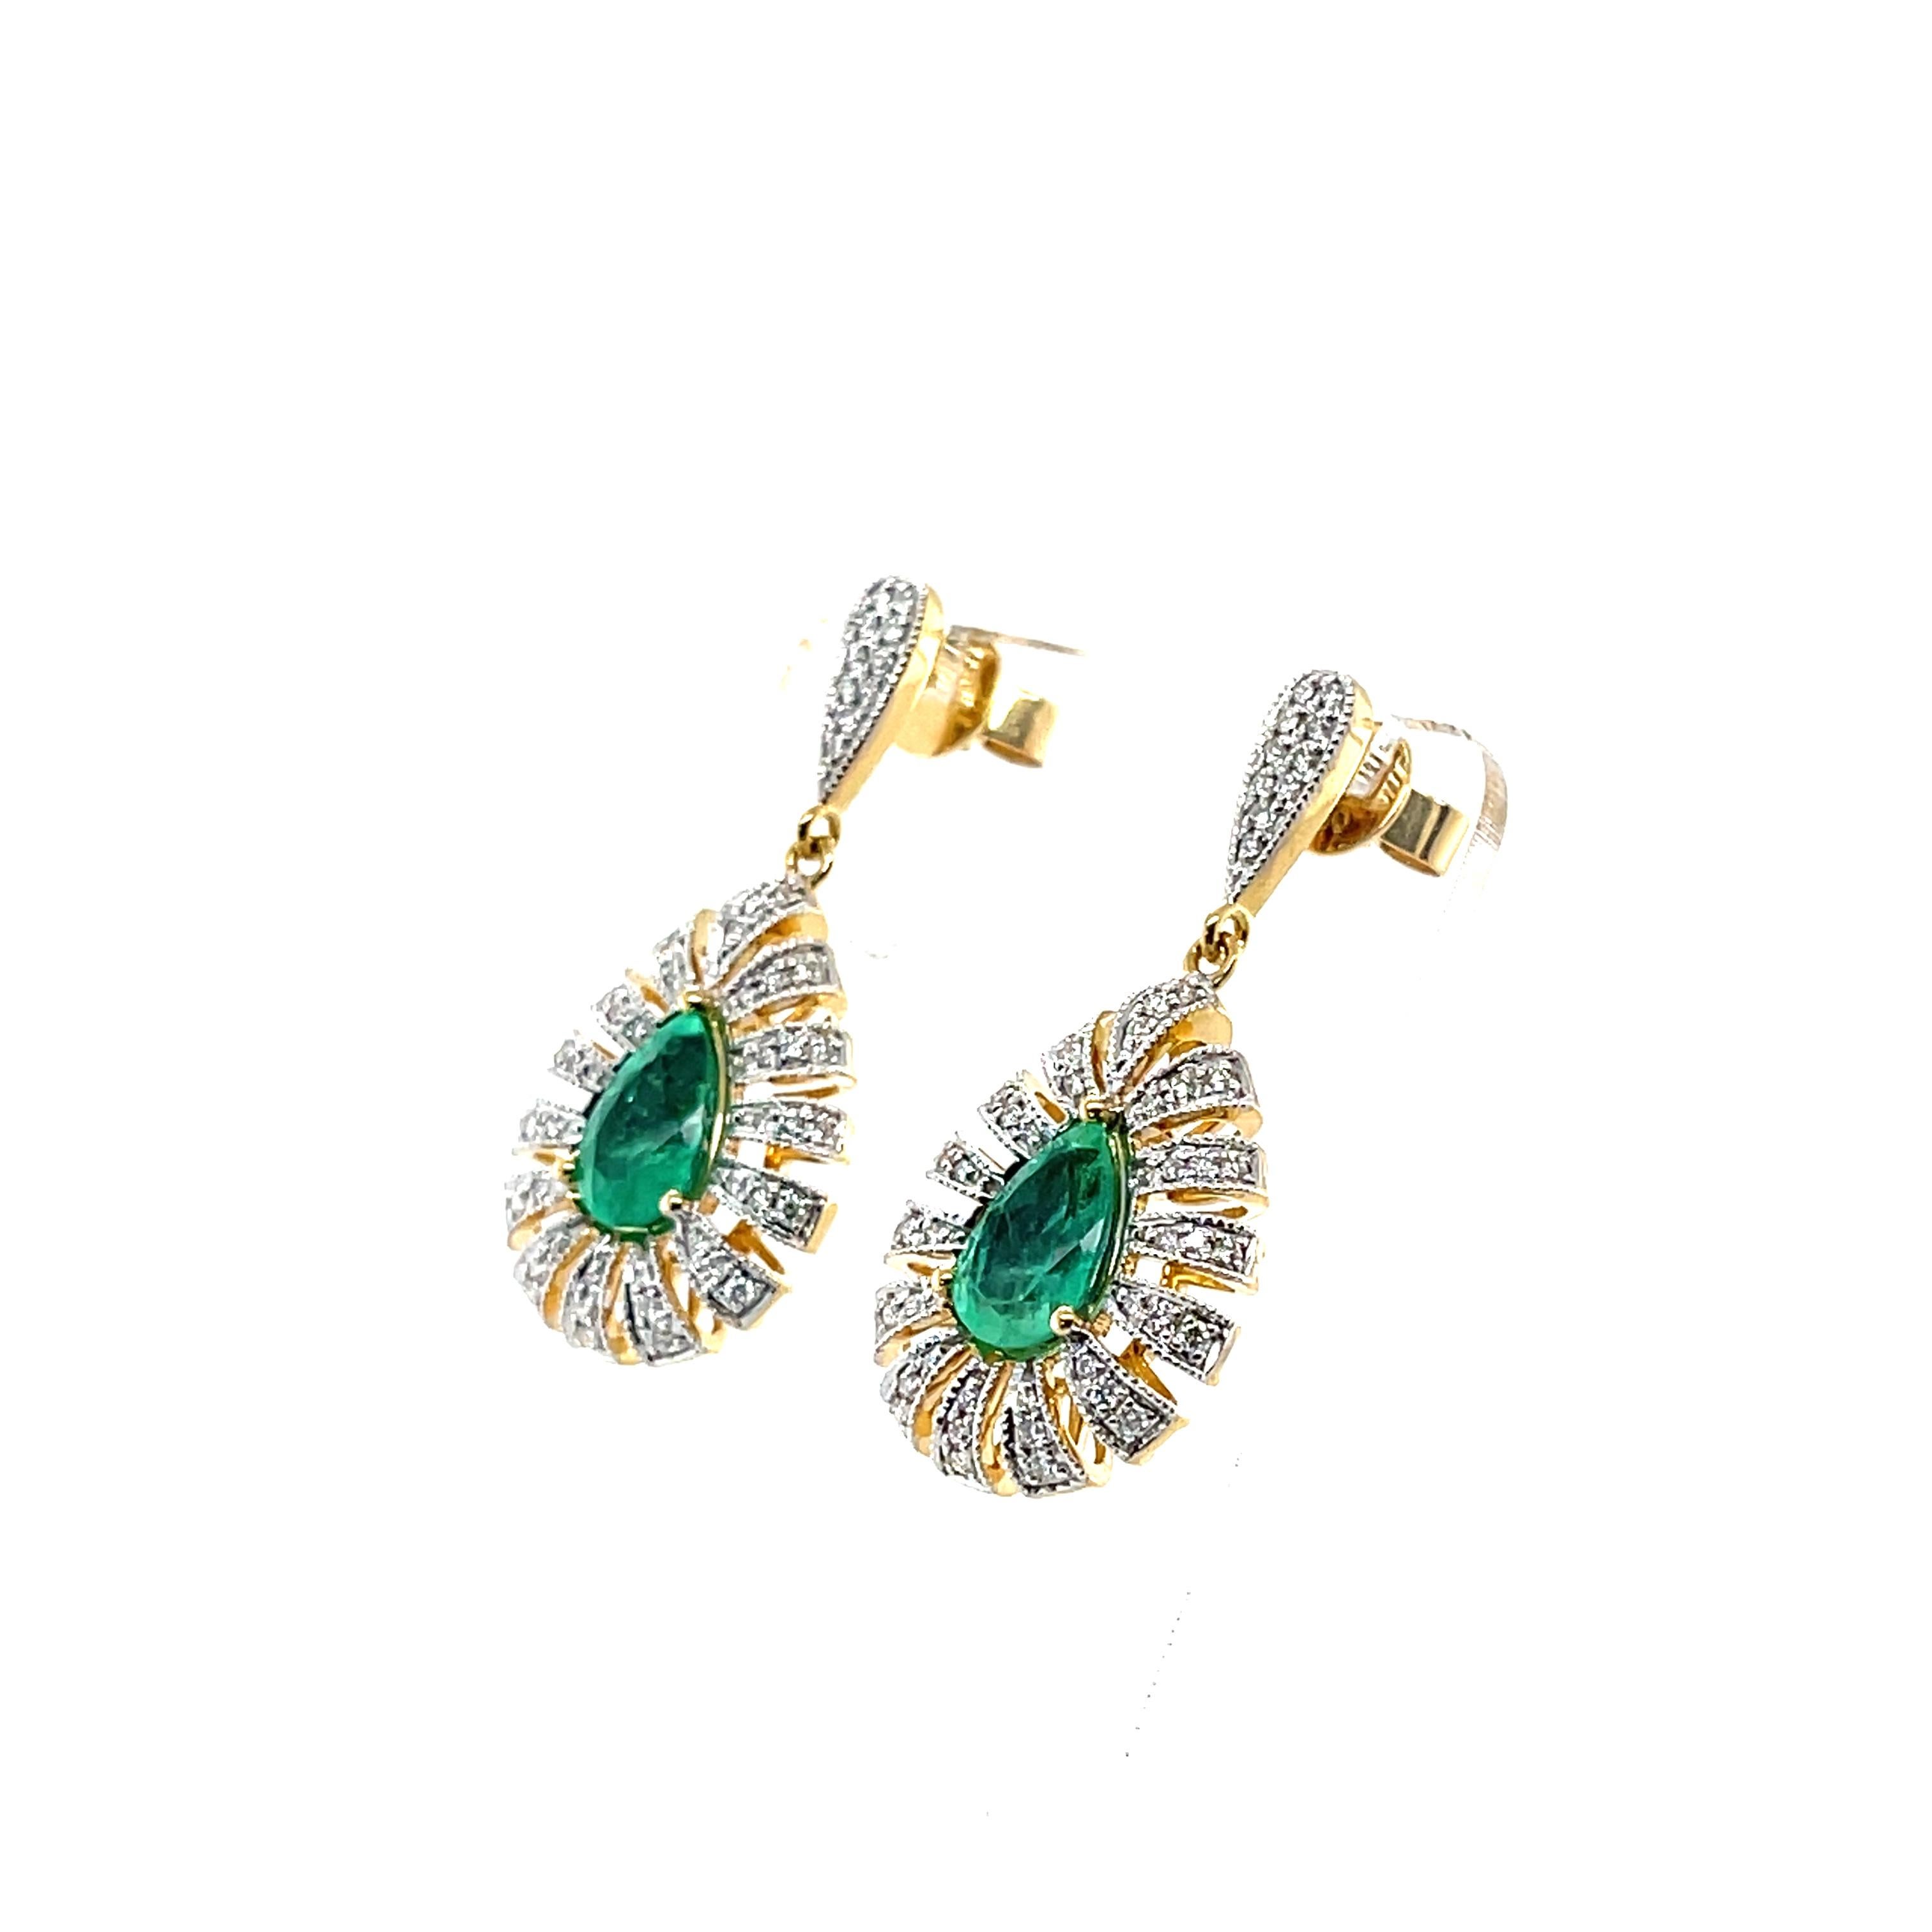 Pear shaped emeralds, crafted in Eighteen Karat yellow gold, featuring a beautifully set one hundred and ten claw set round brilliant cut diamonds, complimented by a beautiful polish finished design. 

Emerald Weight: 2.42ct
Emerald Colour: